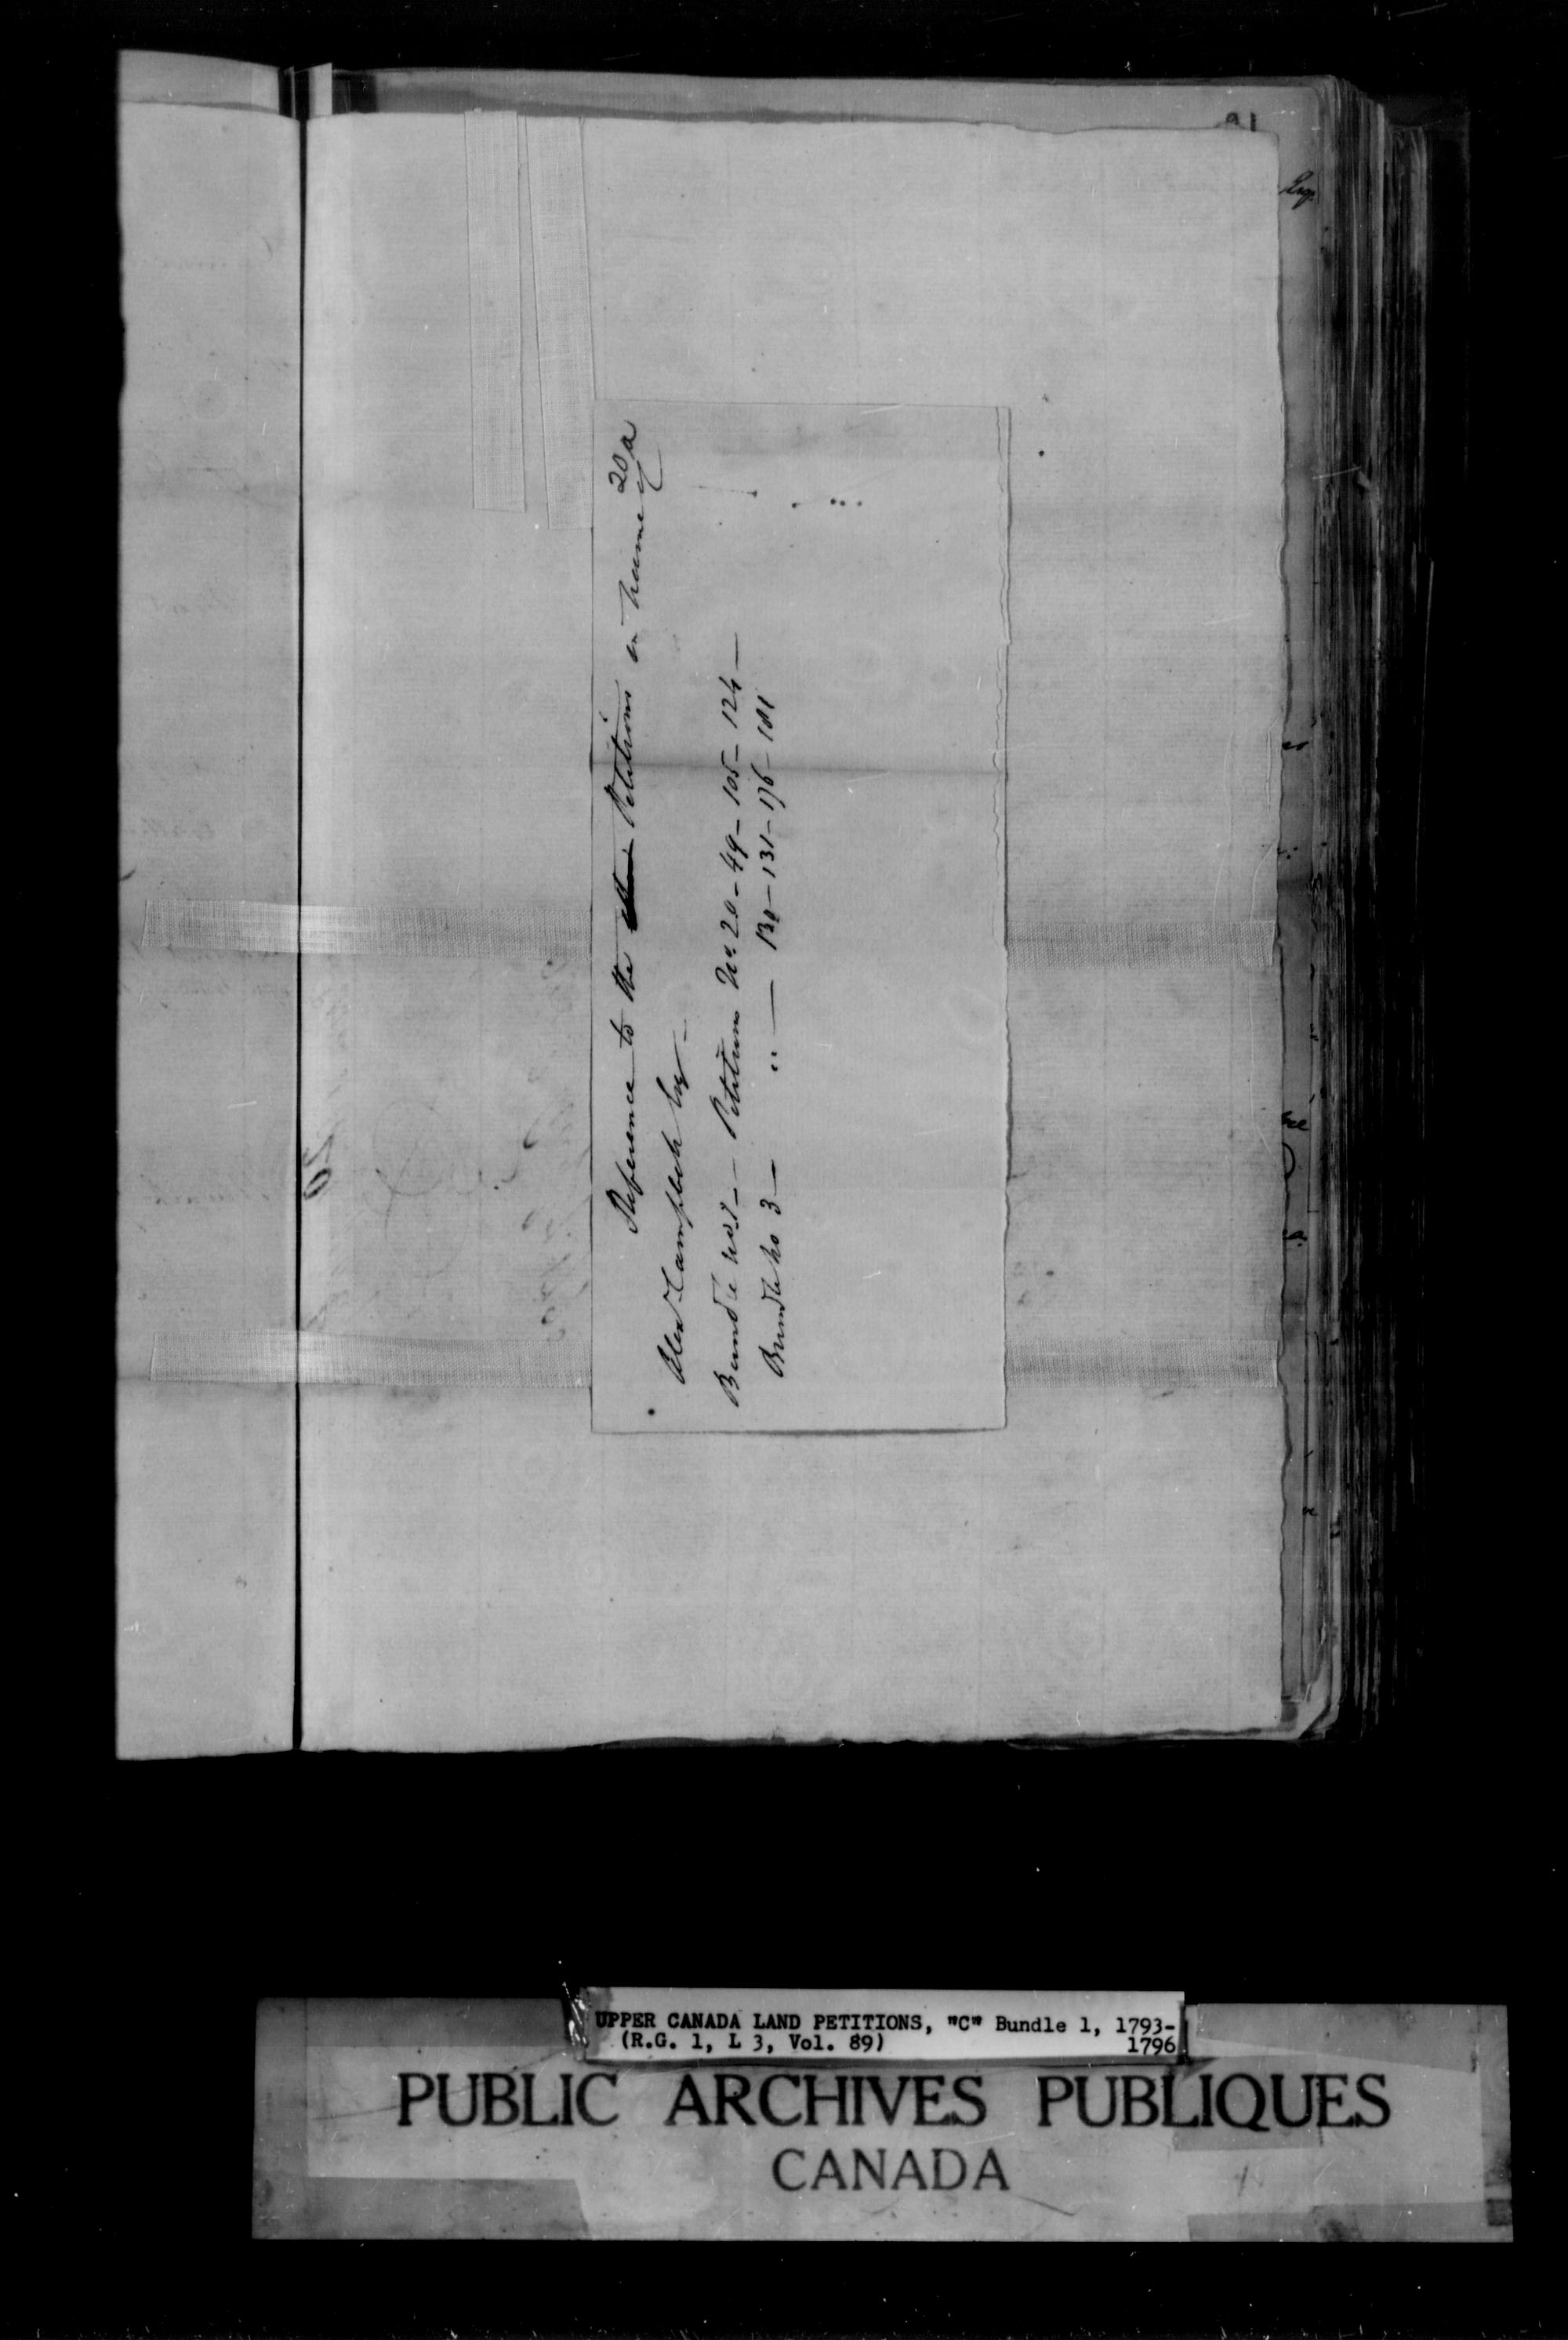 Title: Upper Canada Land Petitions (1763-1865) - Mikan Number: 205131 - Microform: c-1647